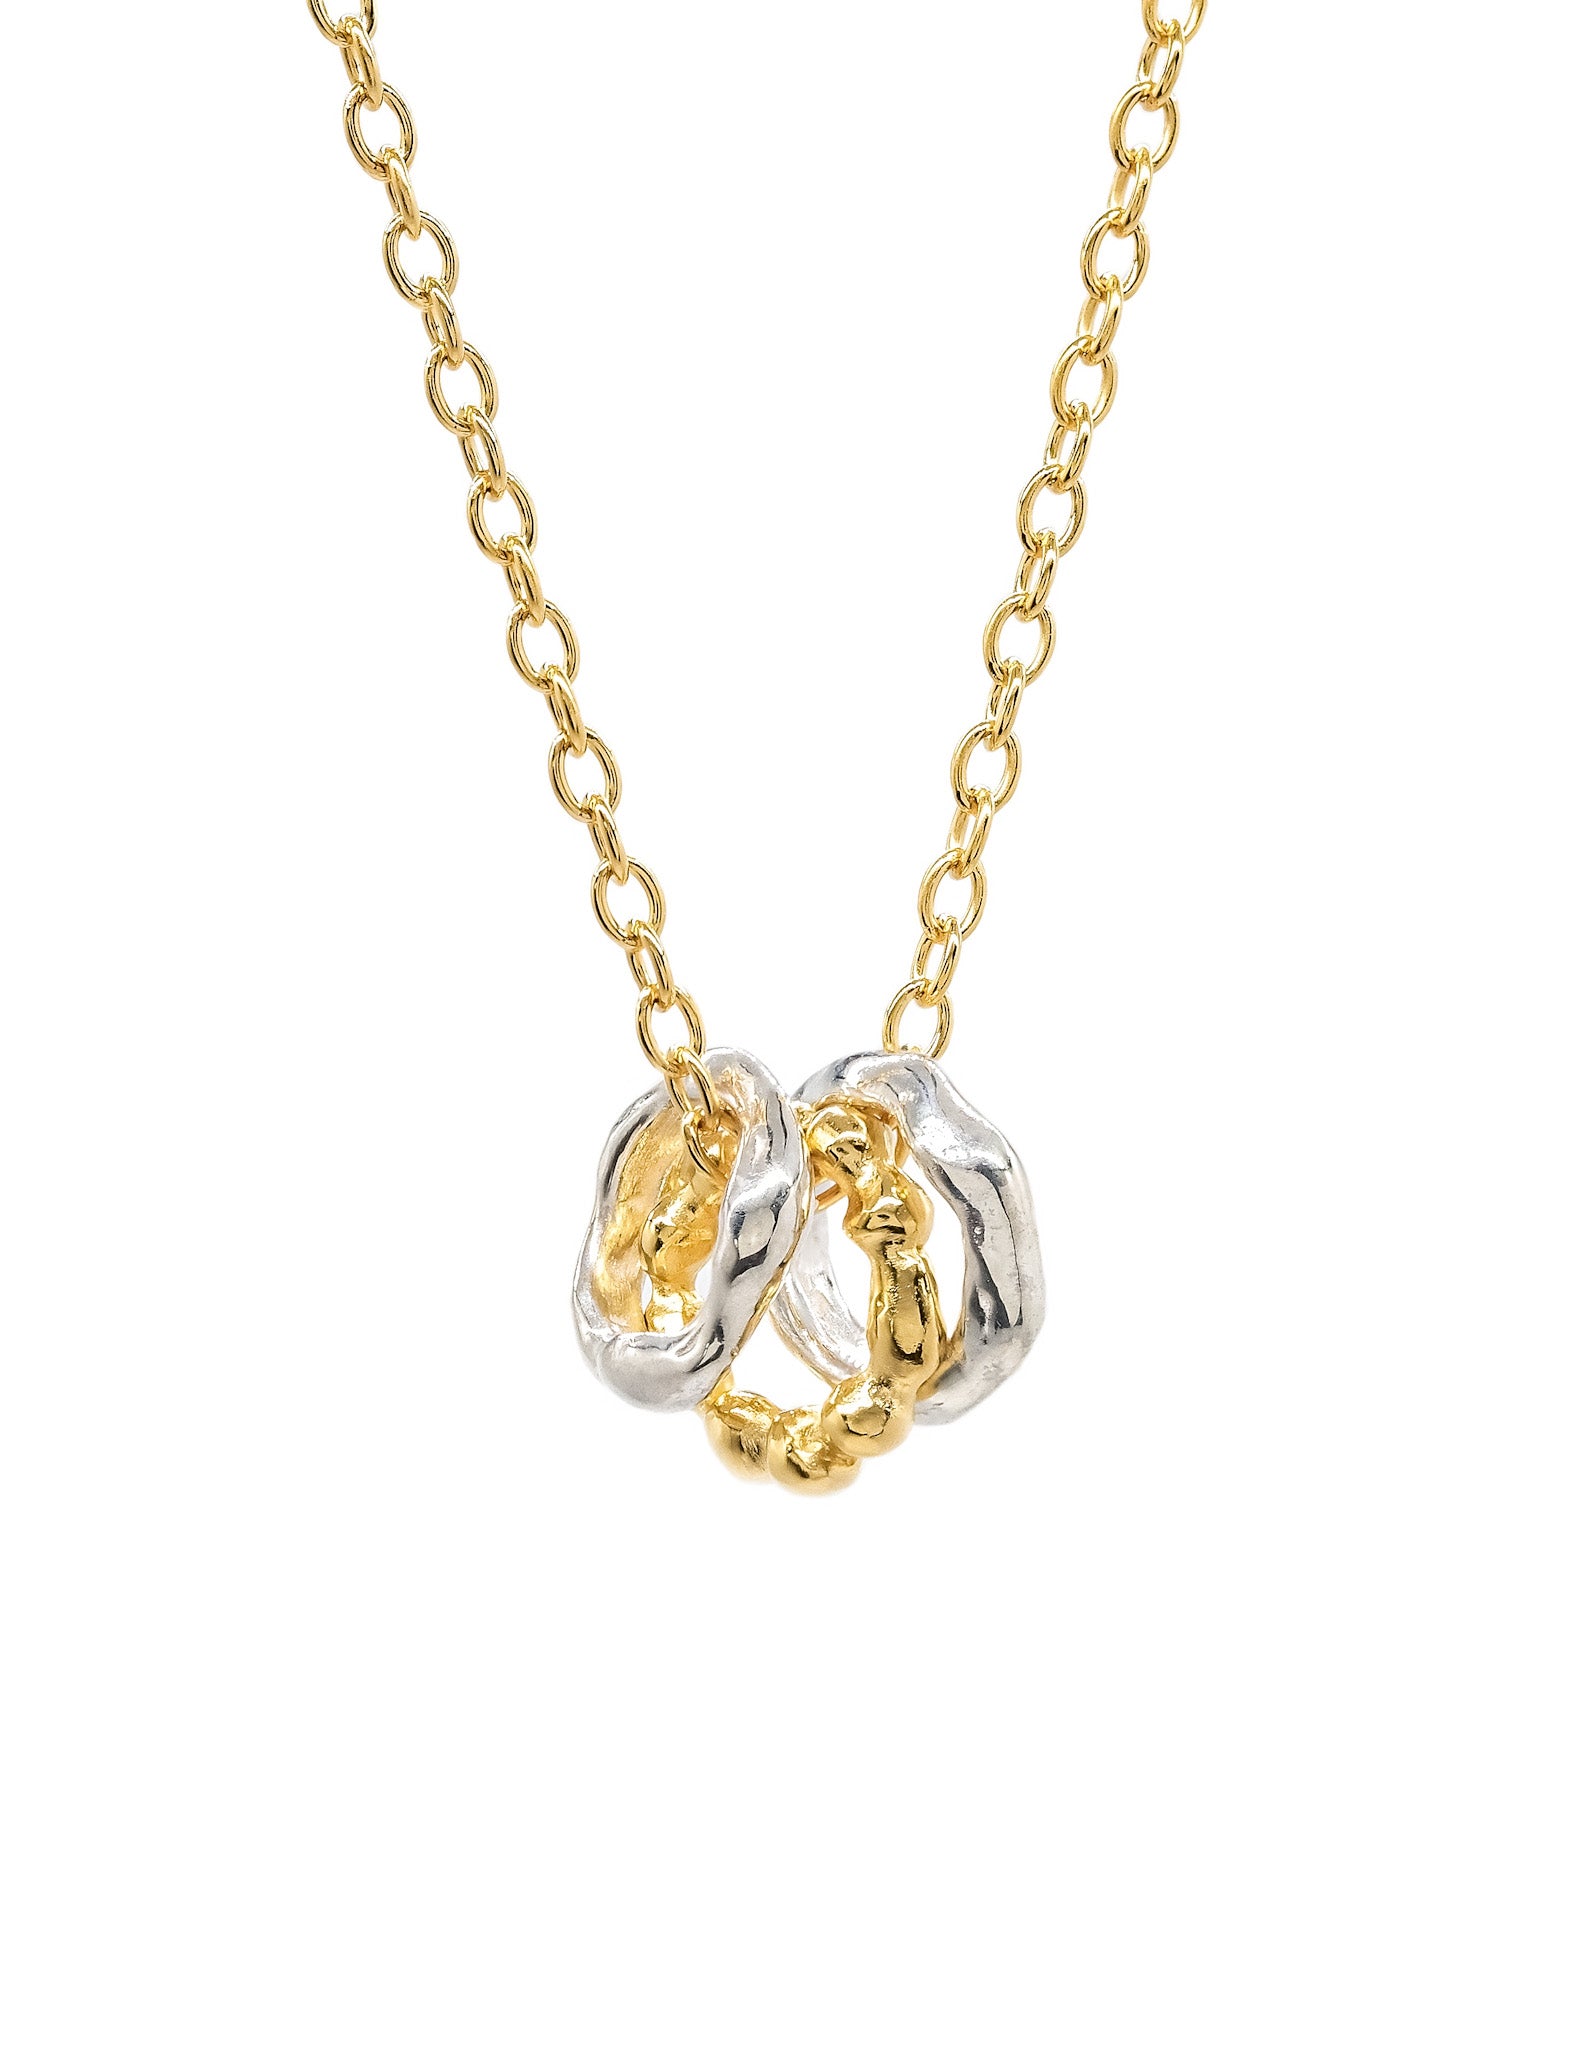 Kharys jewelry two tone wave necklace in sterling silver and 18k gold vermeil